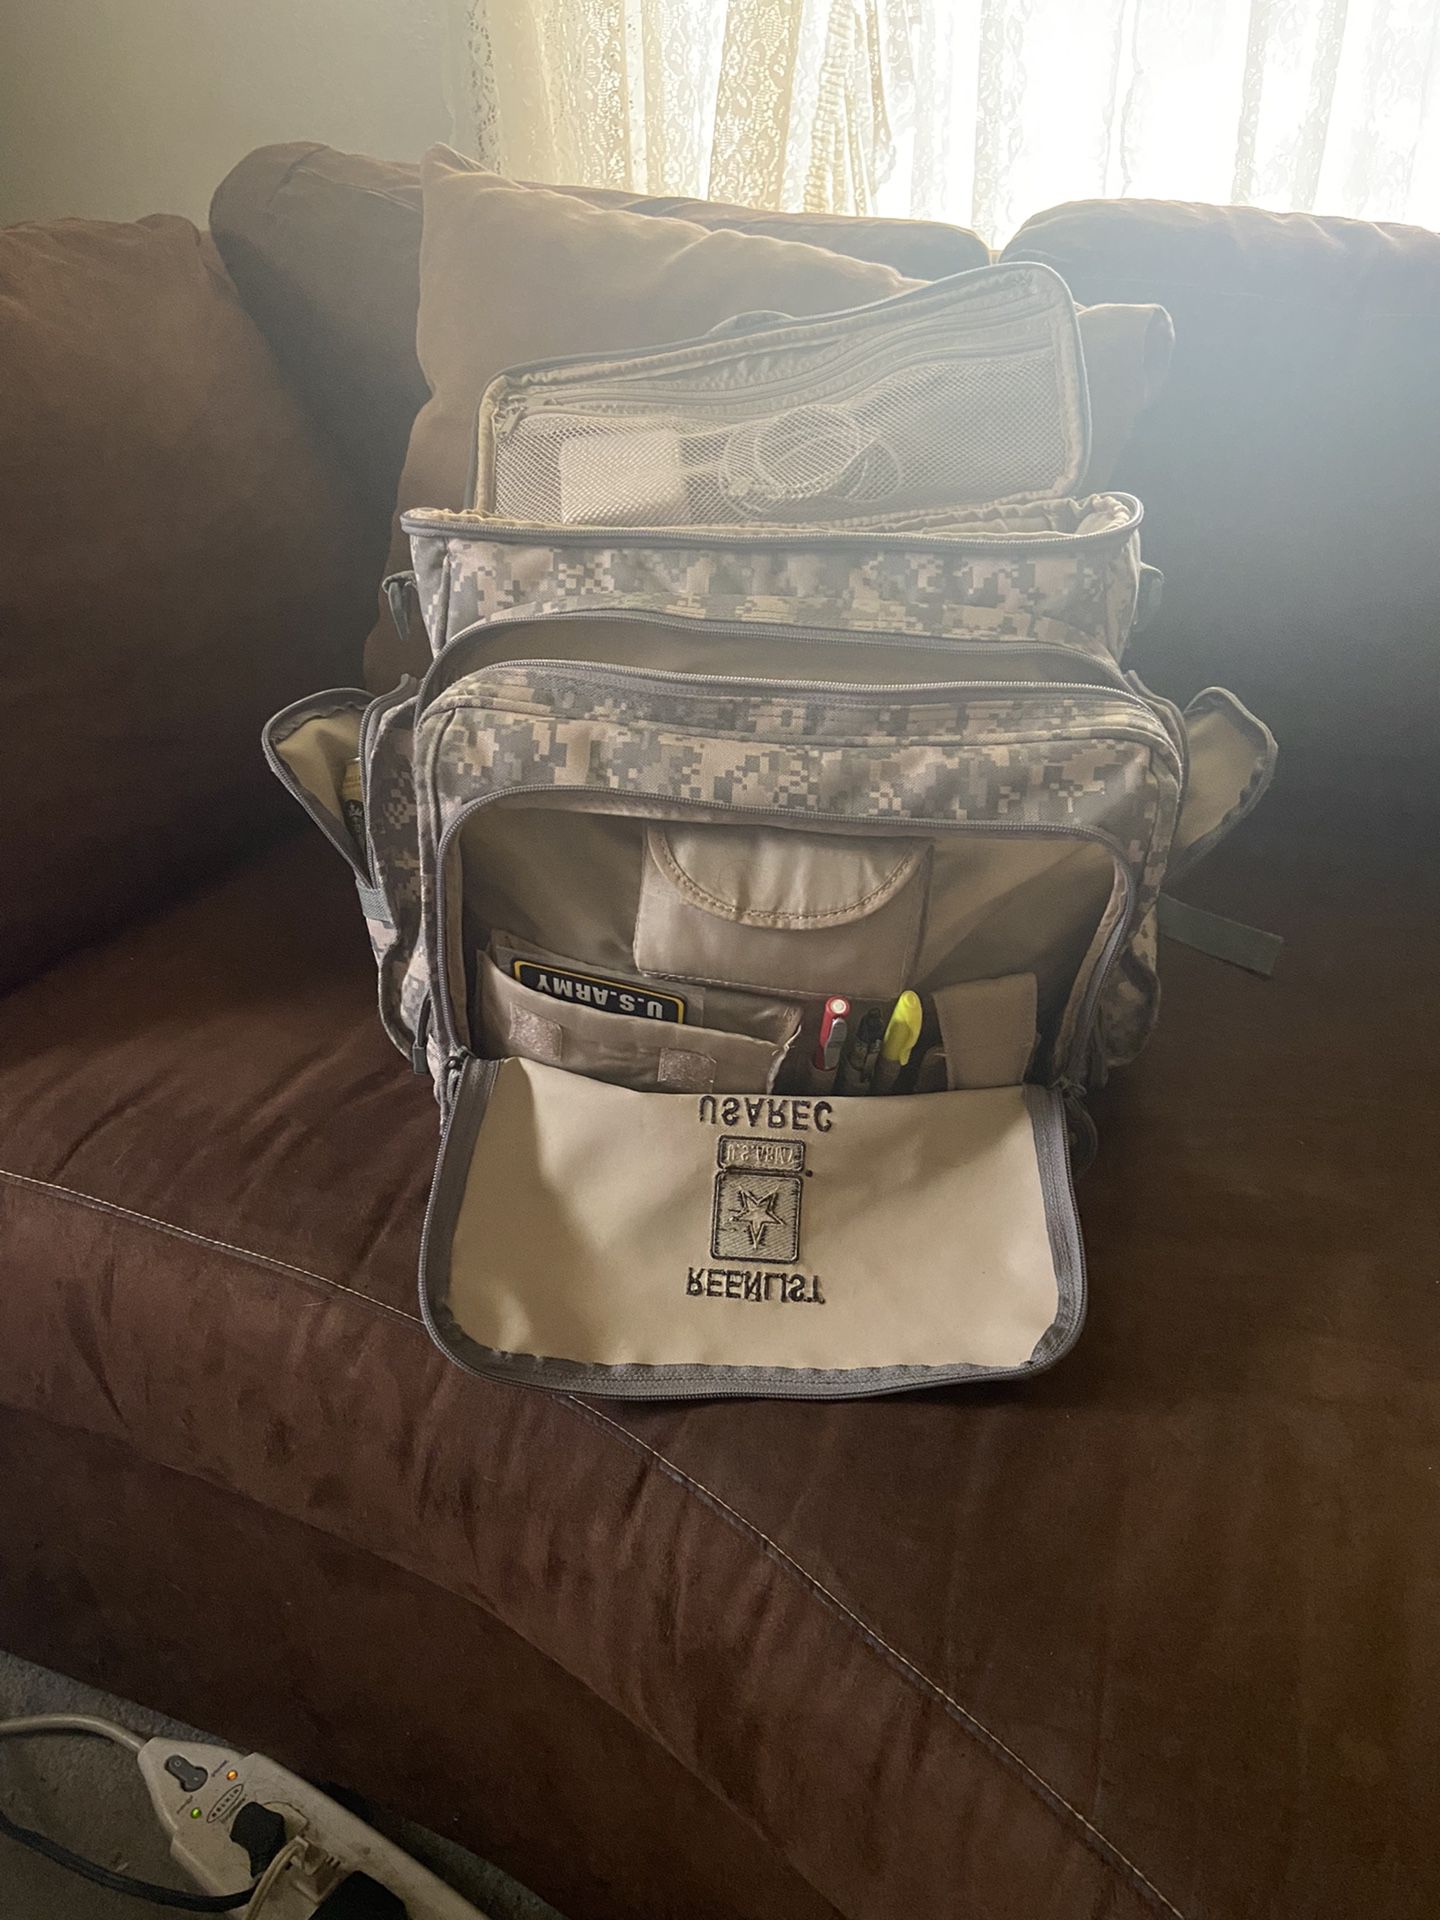 Authentic ACU Laptop/Backpack With Carrier Strap and Notepad